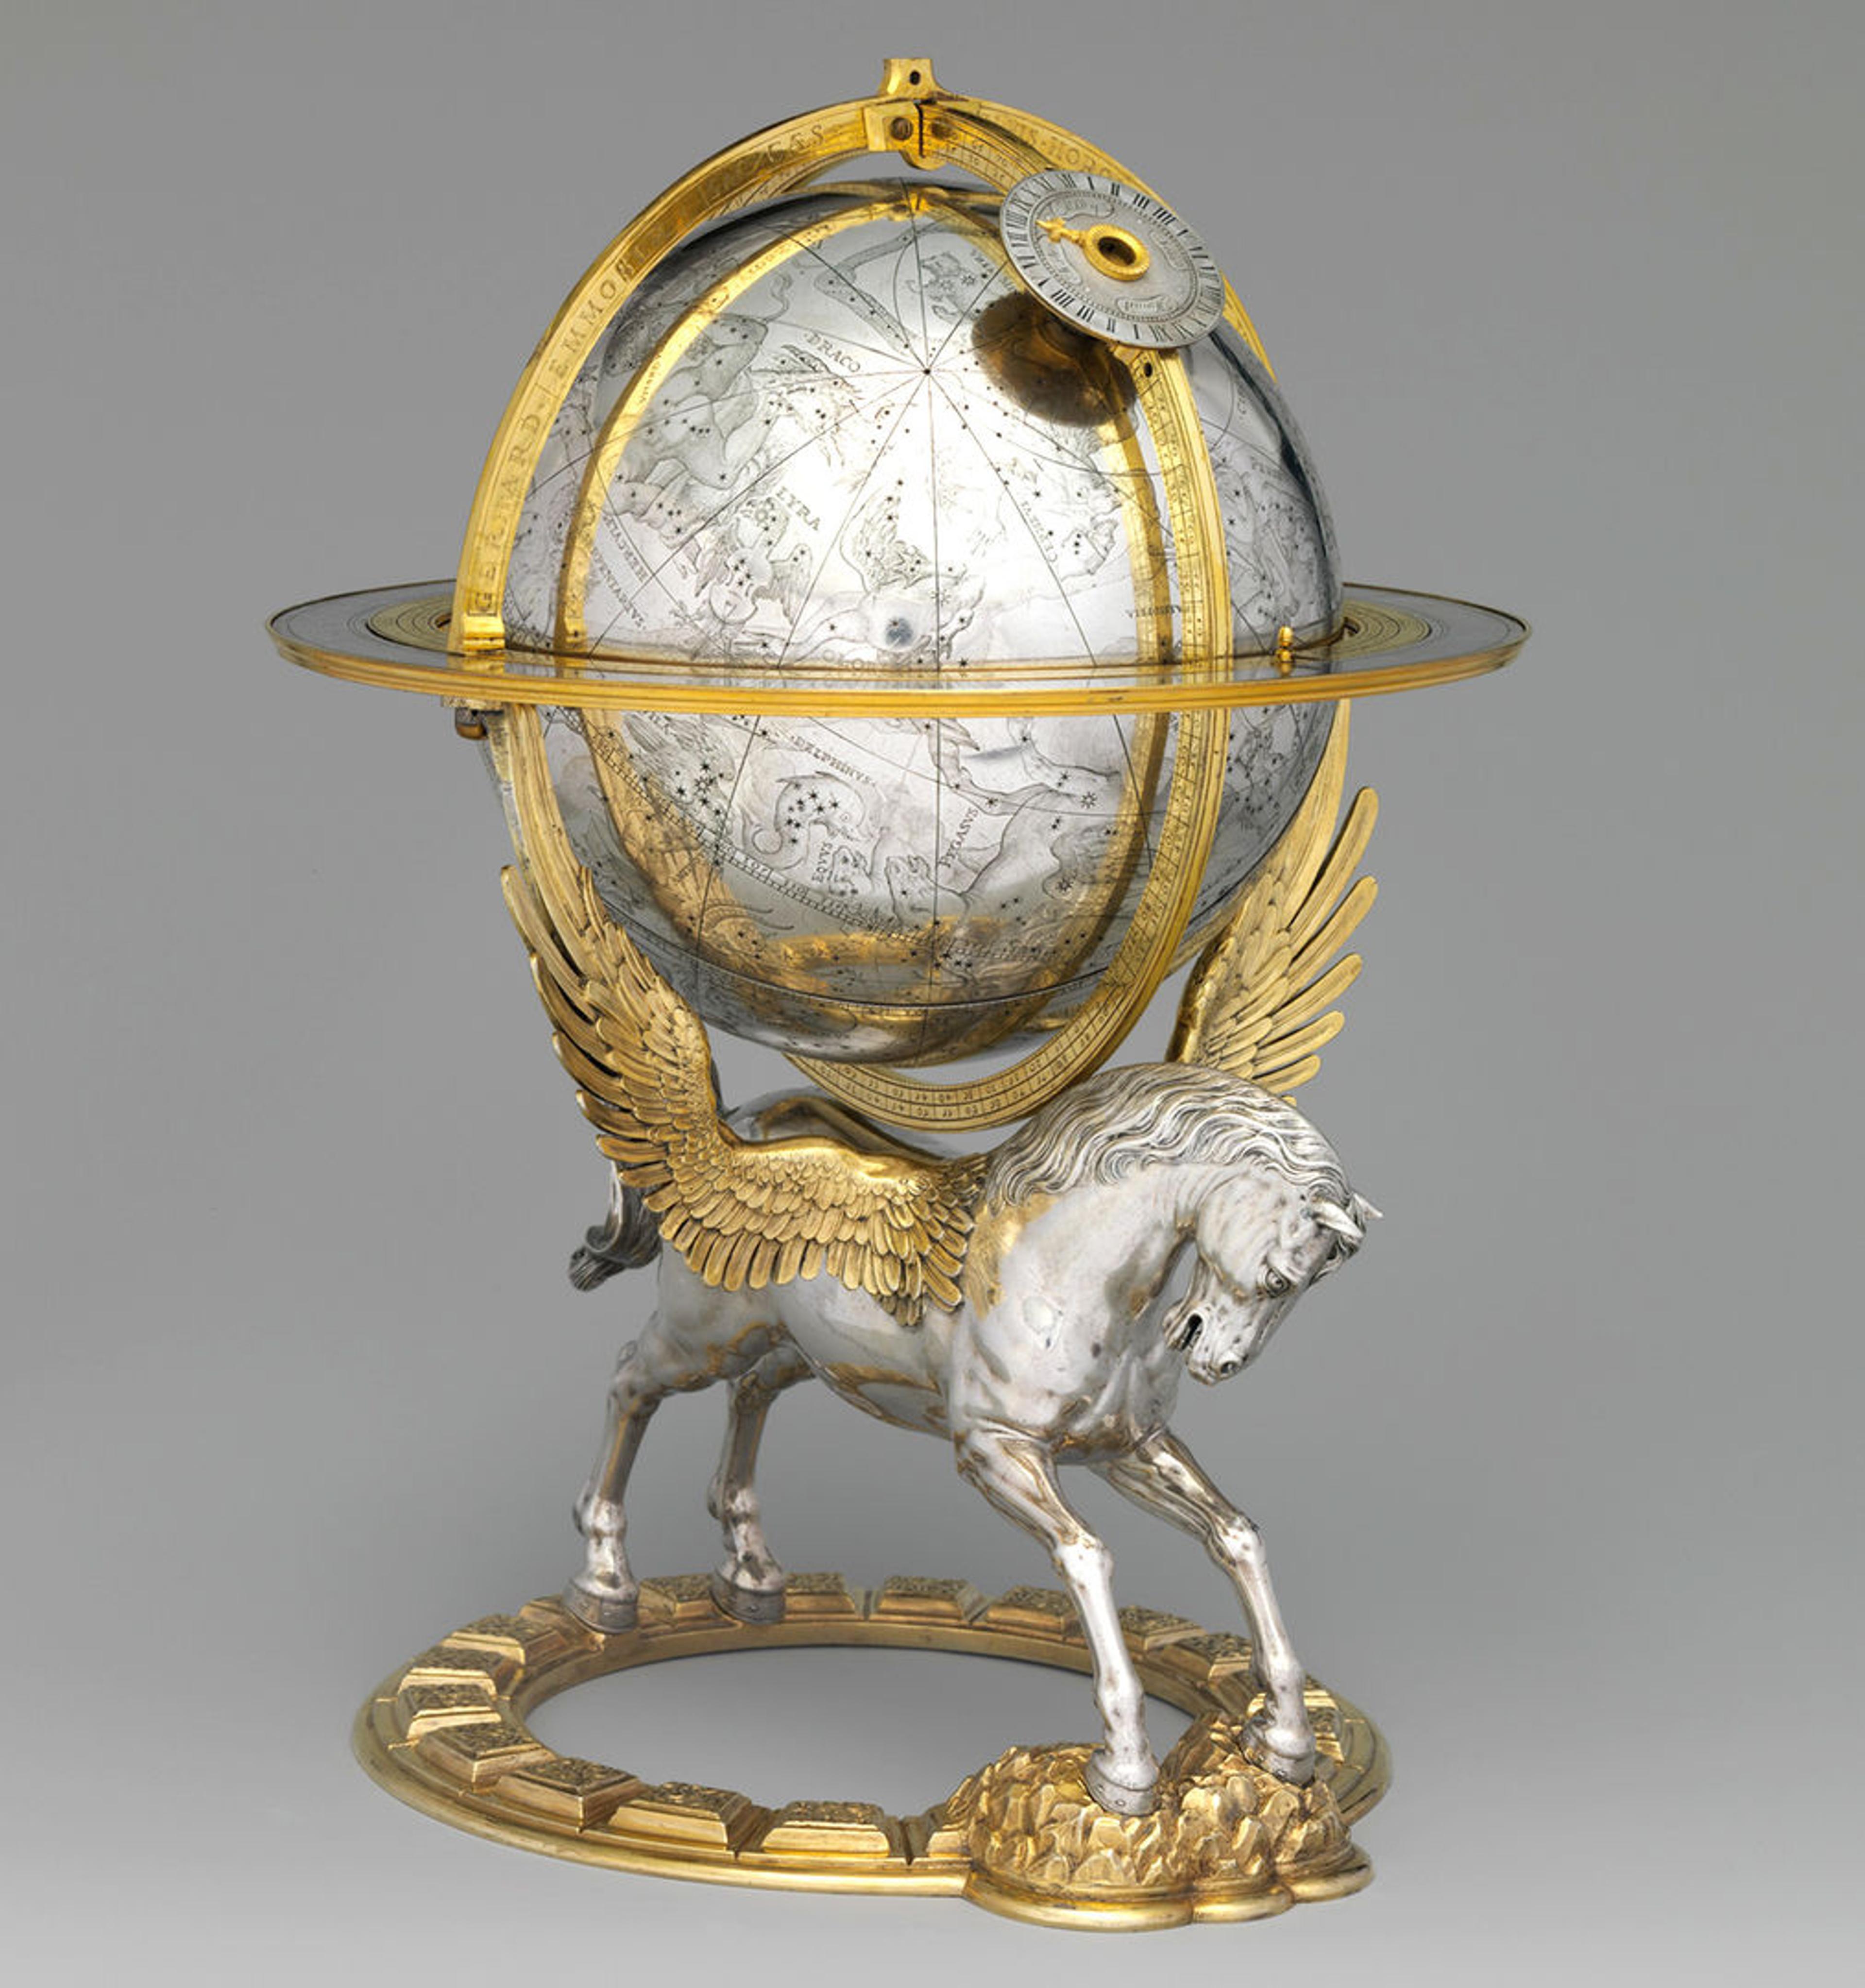 An ornate, silver globe depicting astrological signs, mounted on top of a silver pegusis with golden wings